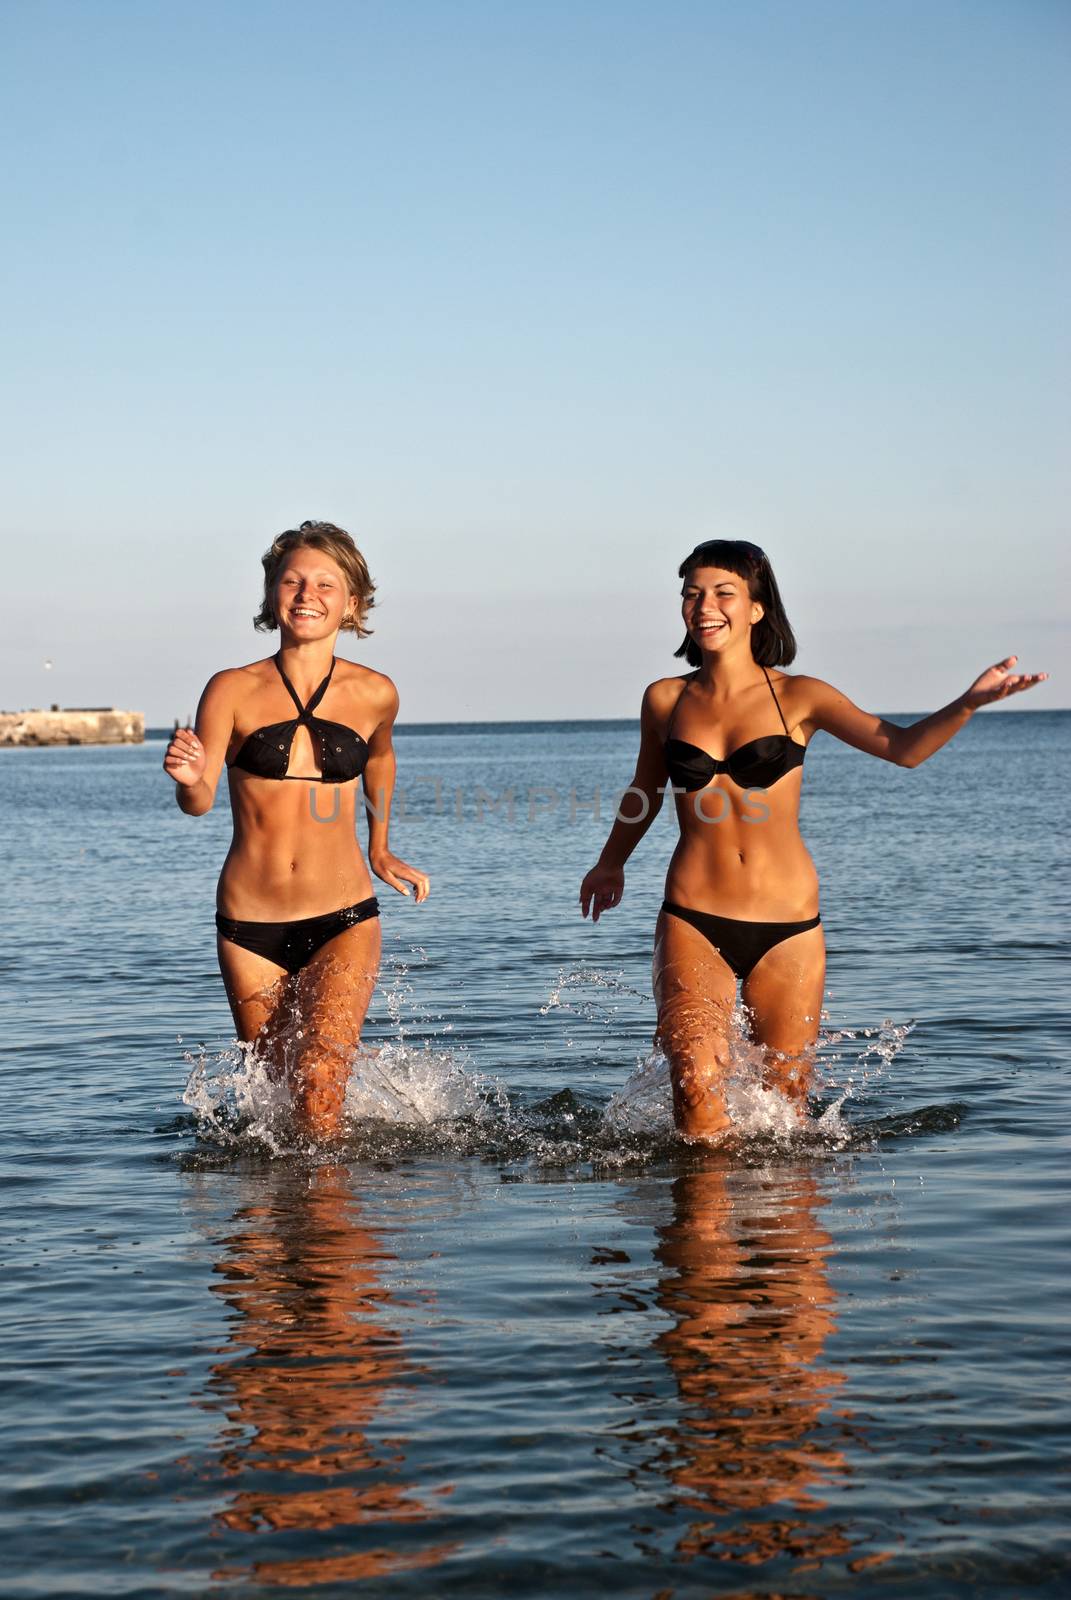 Young girls running on water by Anpet2000